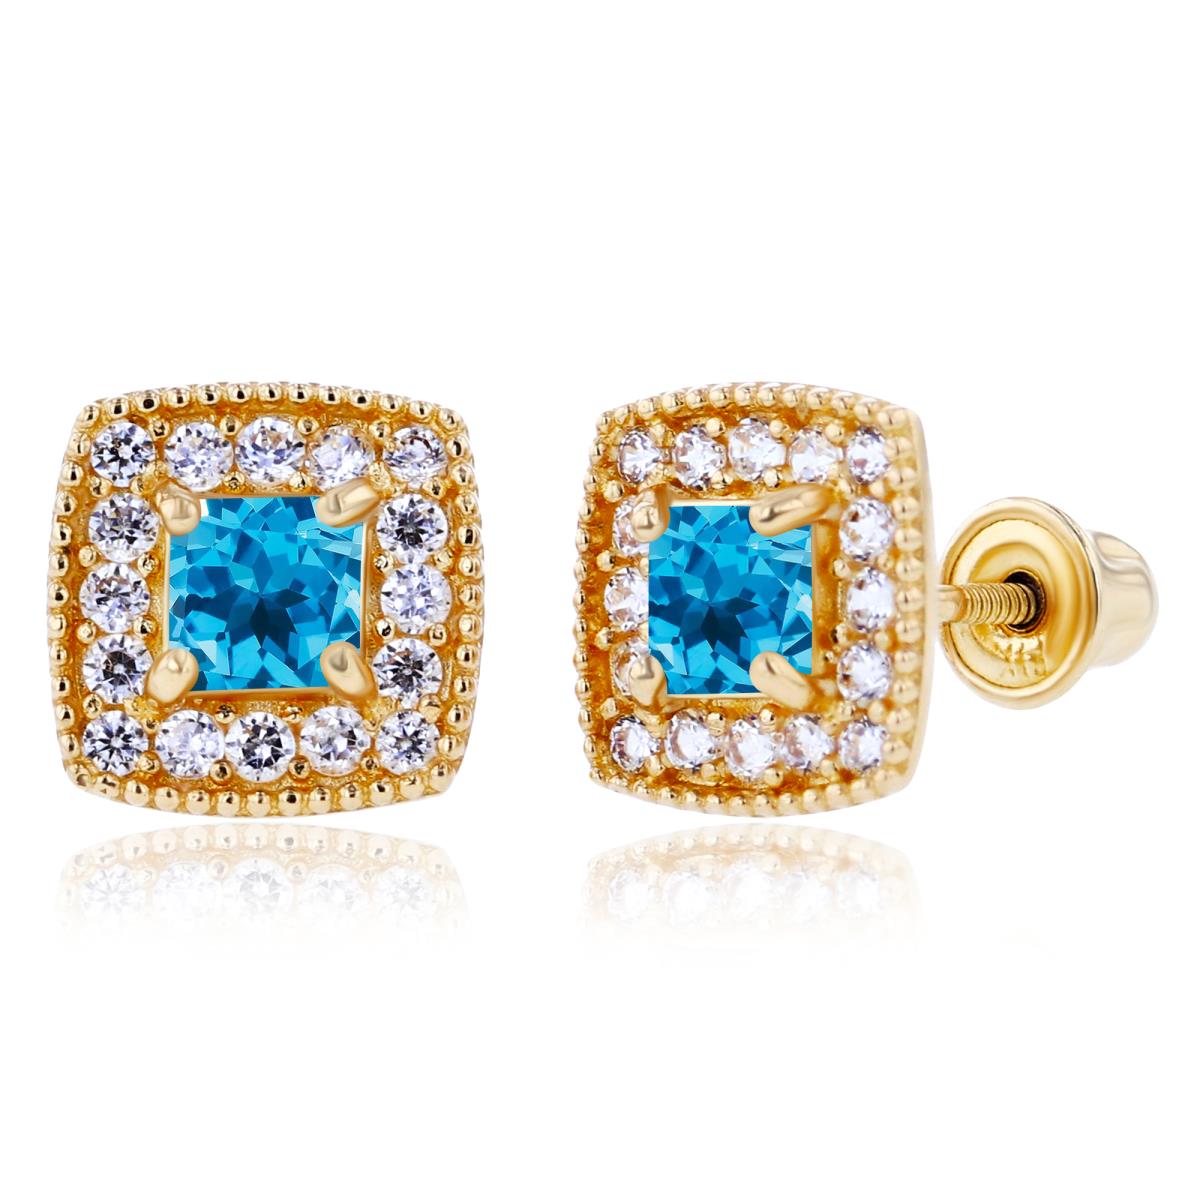 Sterling Silver Yellow 3mm Square Swiss Blue Topaz & 1mm Created White Sapphire Cushion Halo Screwback Earrings